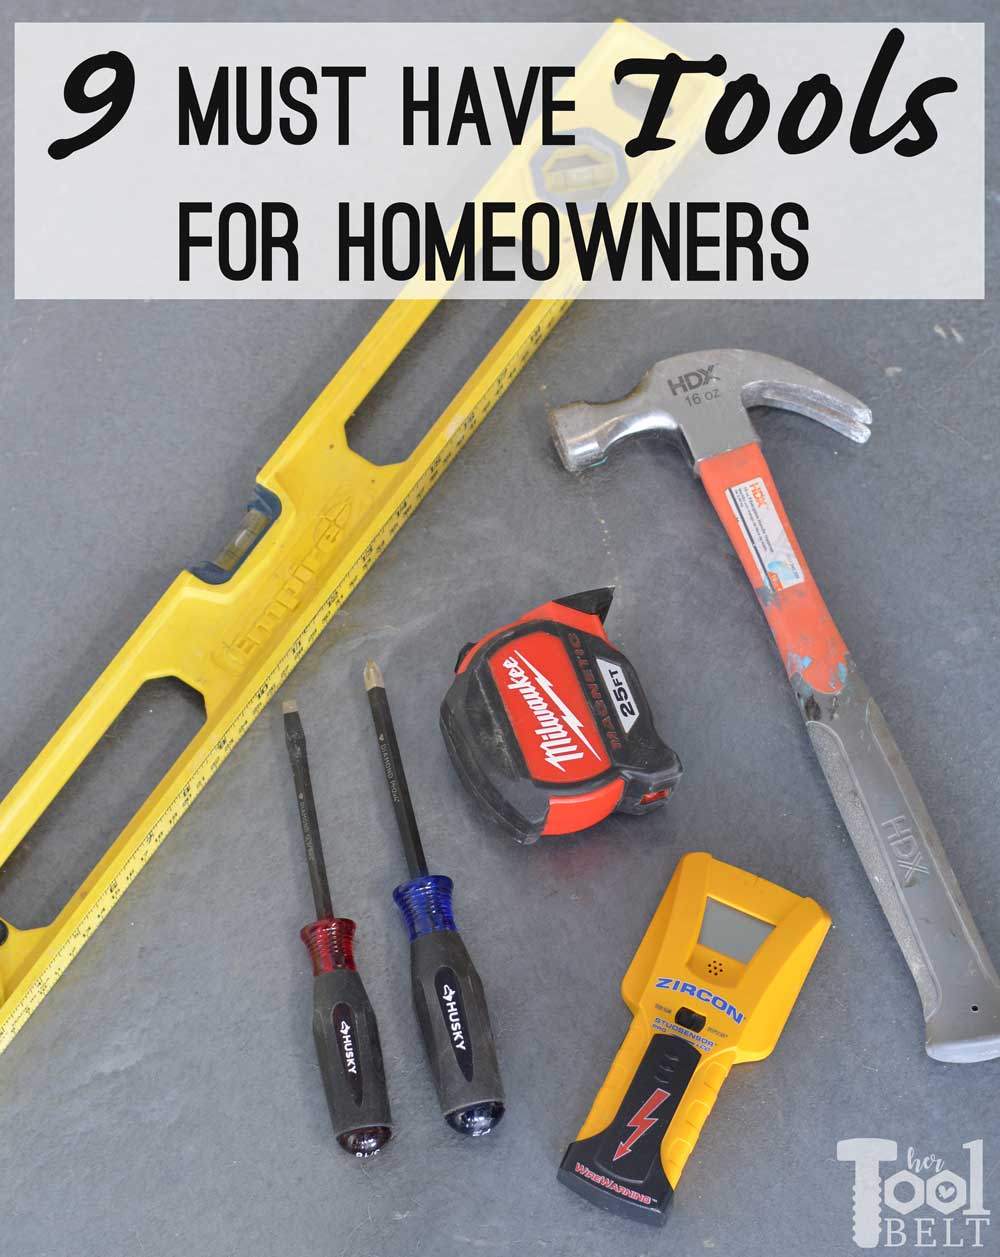 https://www.hertoolbelt.com/wp-content/uploads/2017/10/9-must-have-tools-for-homeowners.jpg